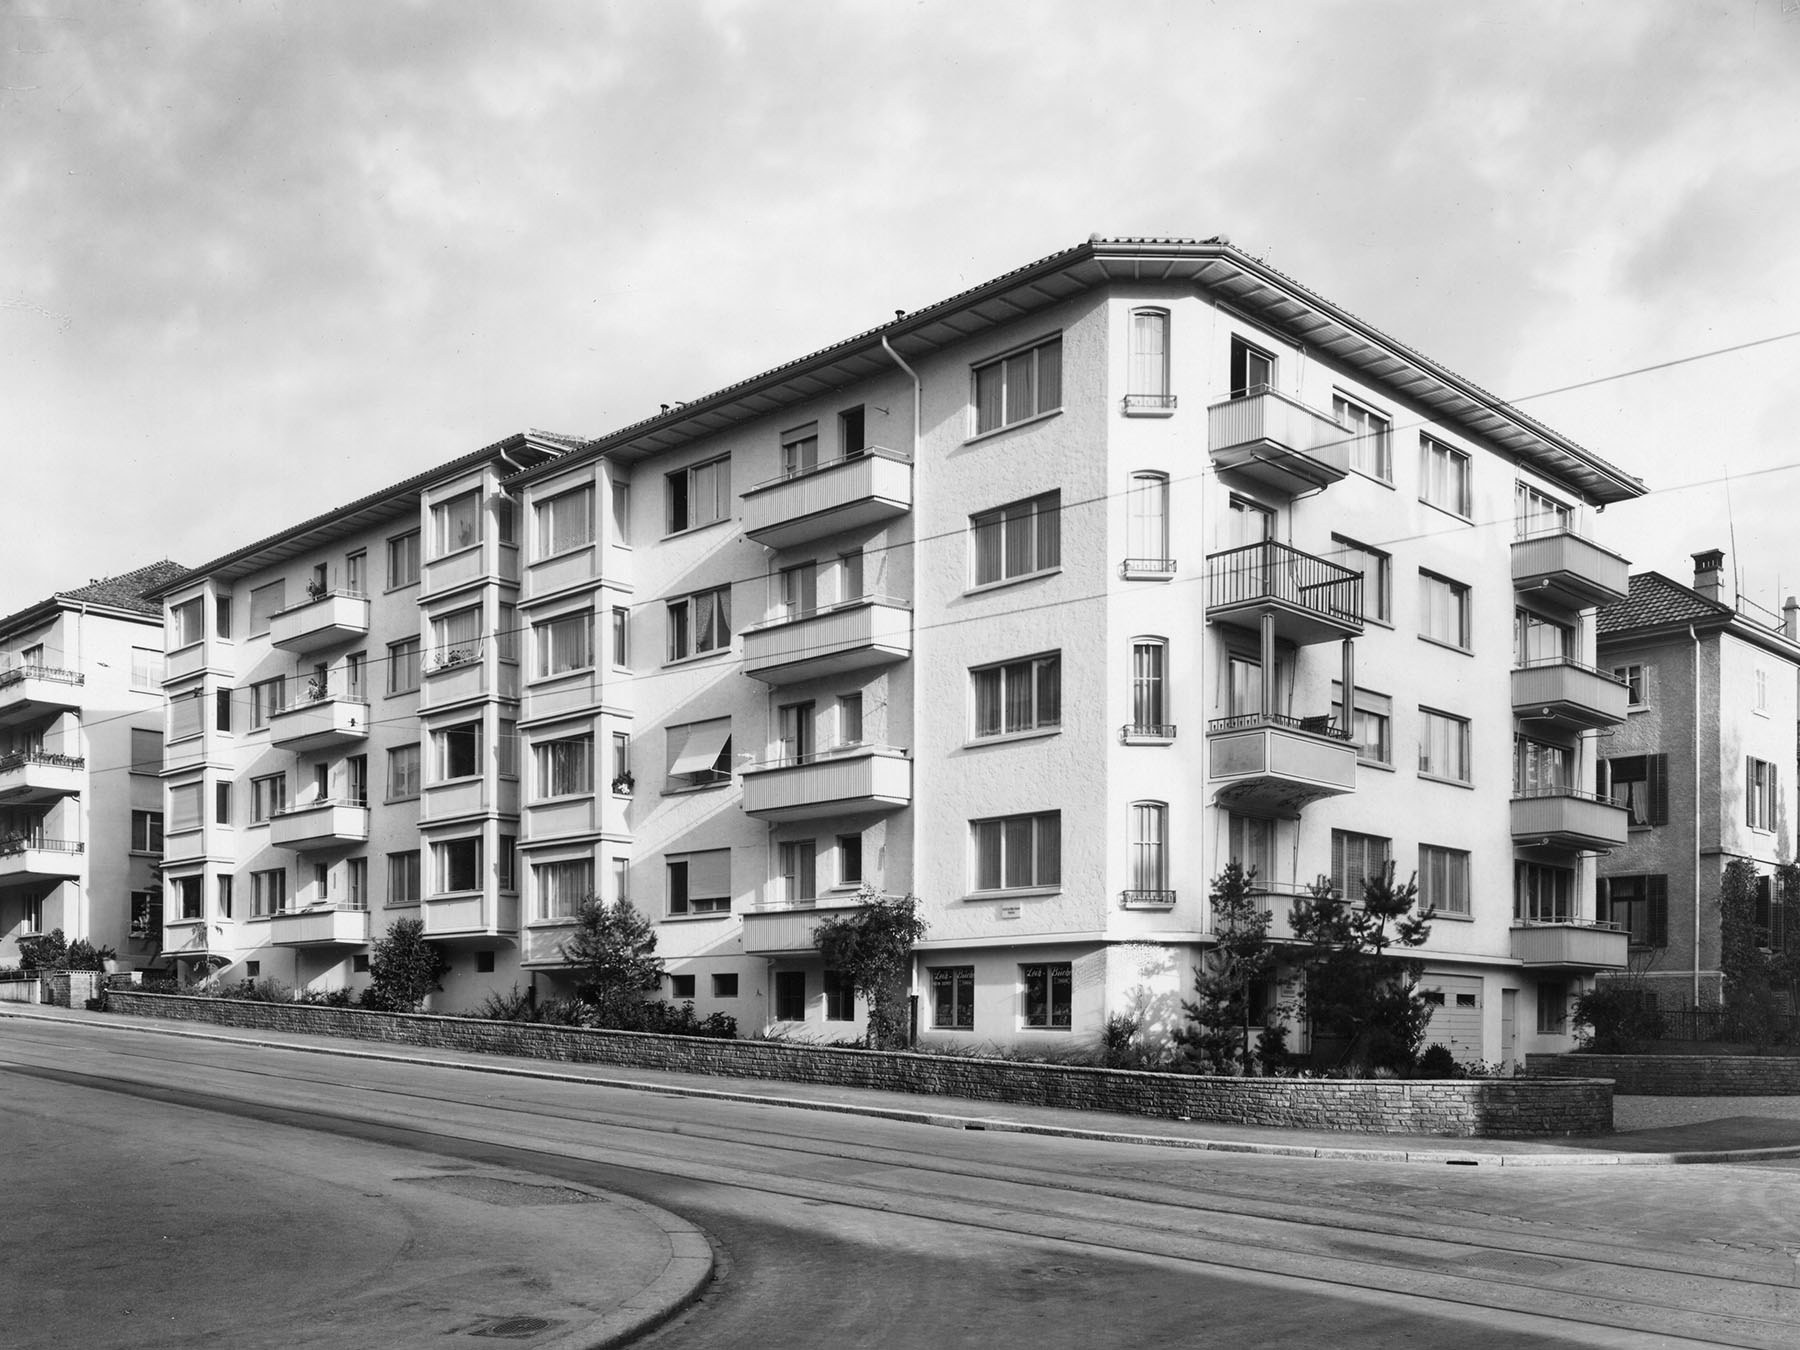 The corner house at Freiestrasse 101, Zurich, 1945. (Image: Wolf-Bender’s Erben/Architectural History Archive of the City of Zurich)